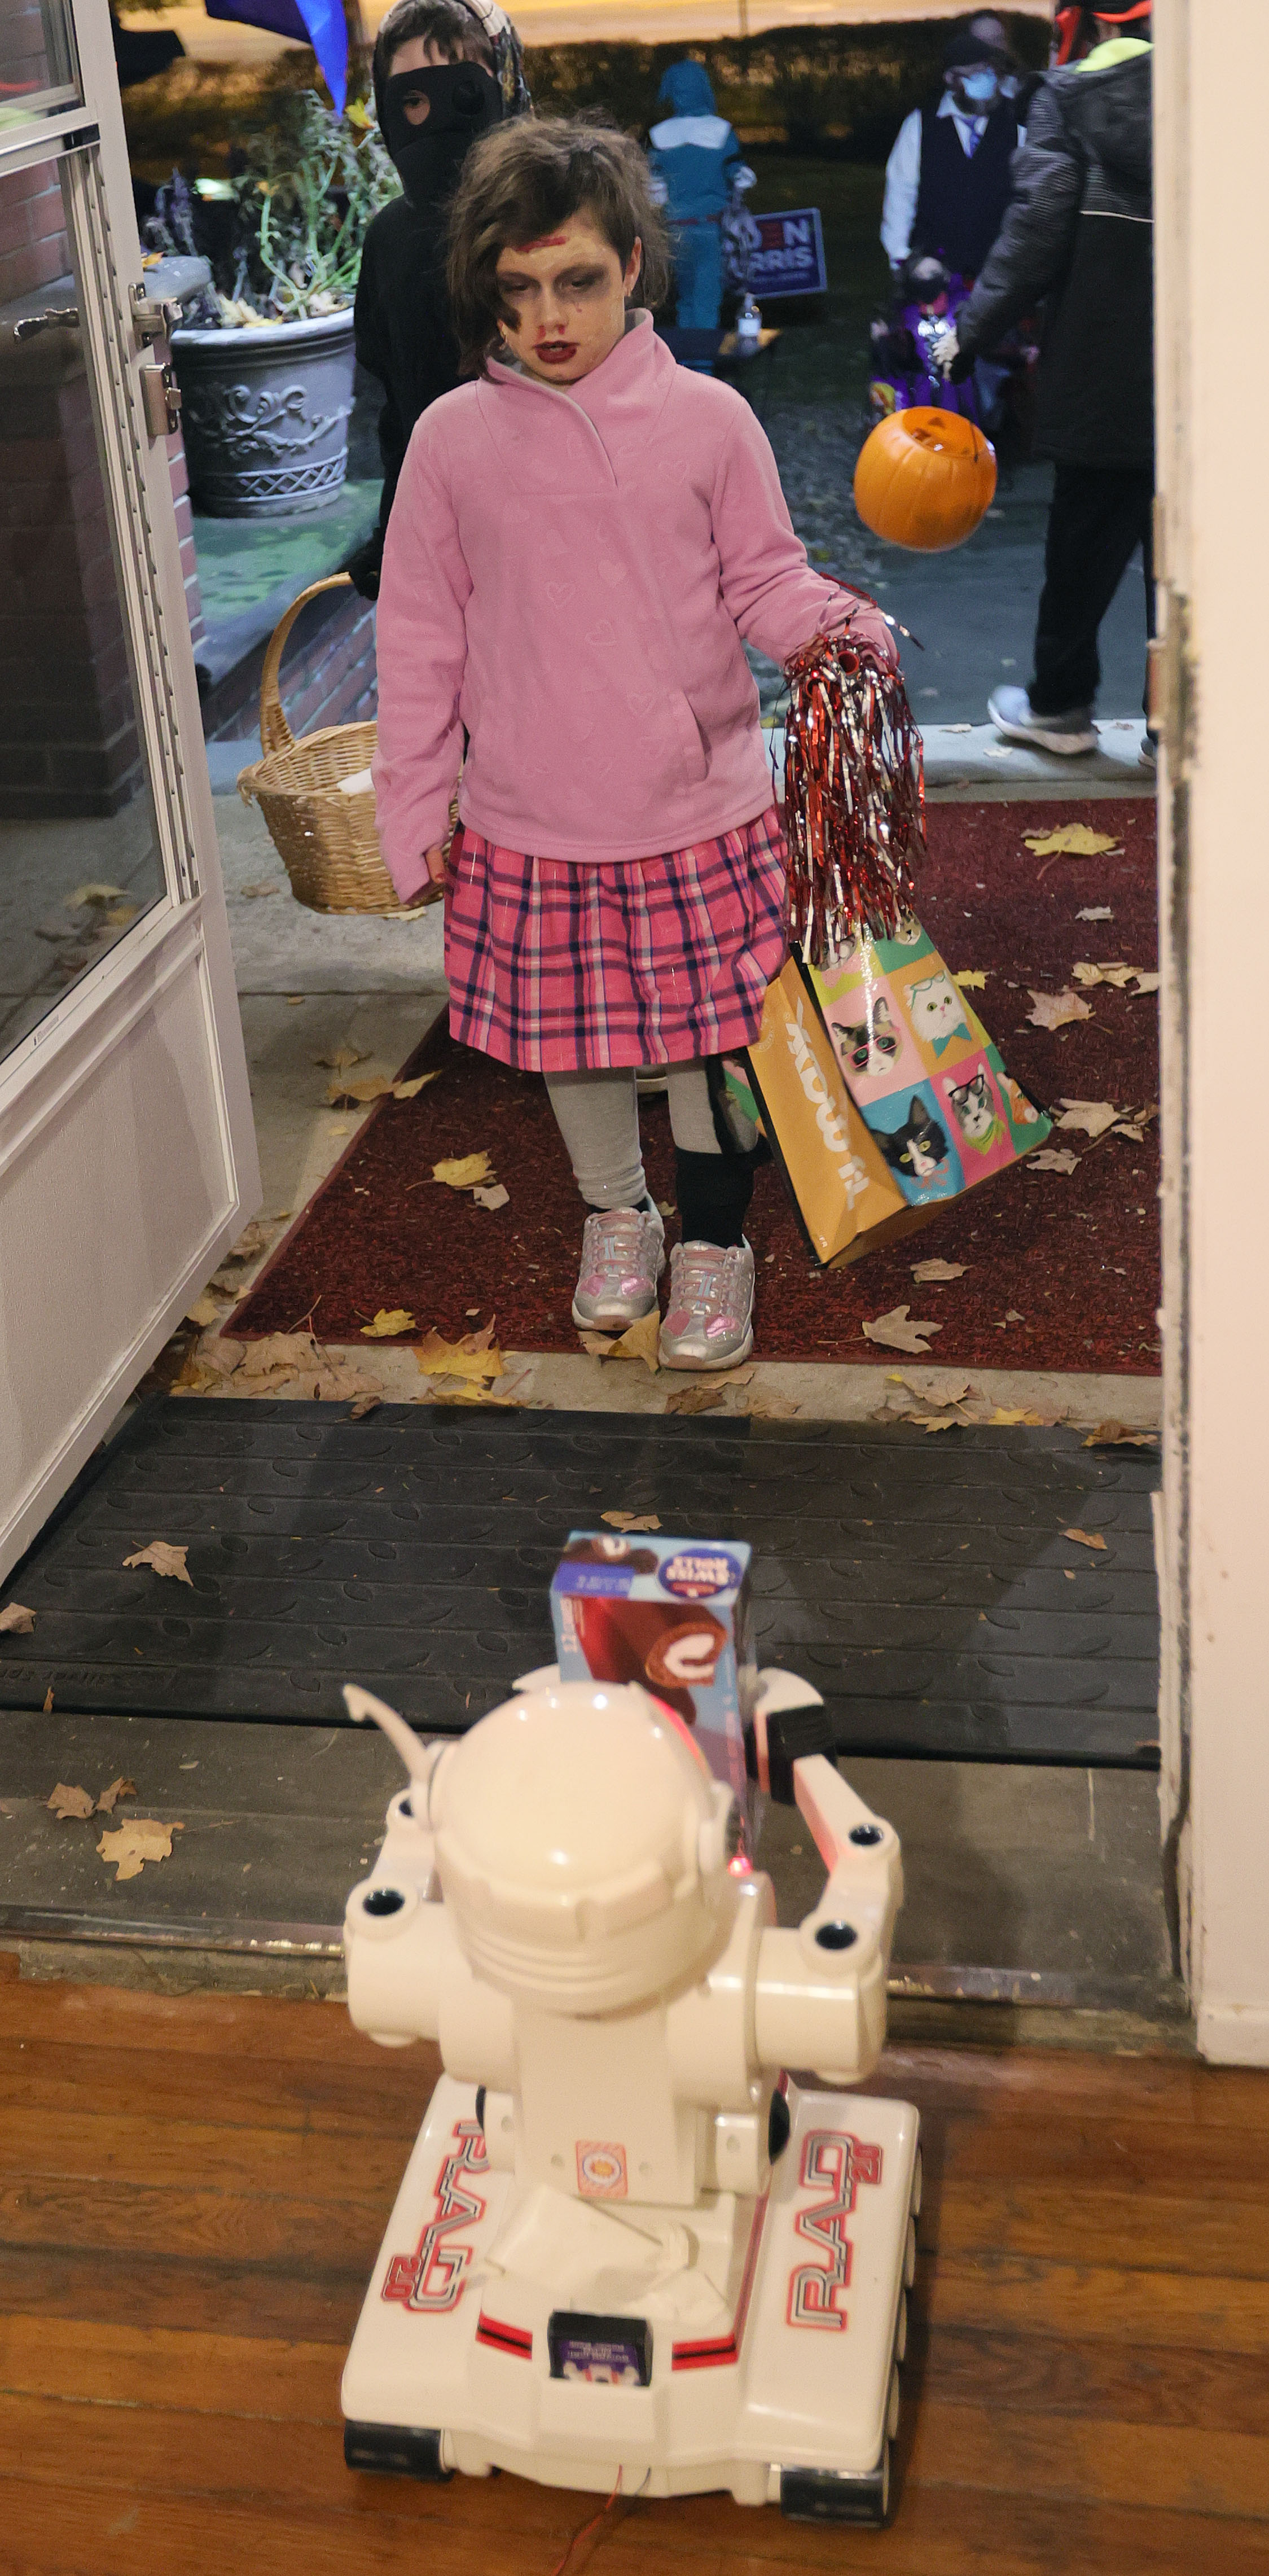 Halloween trickortreating in Cleveland Heights, October 31, 2020